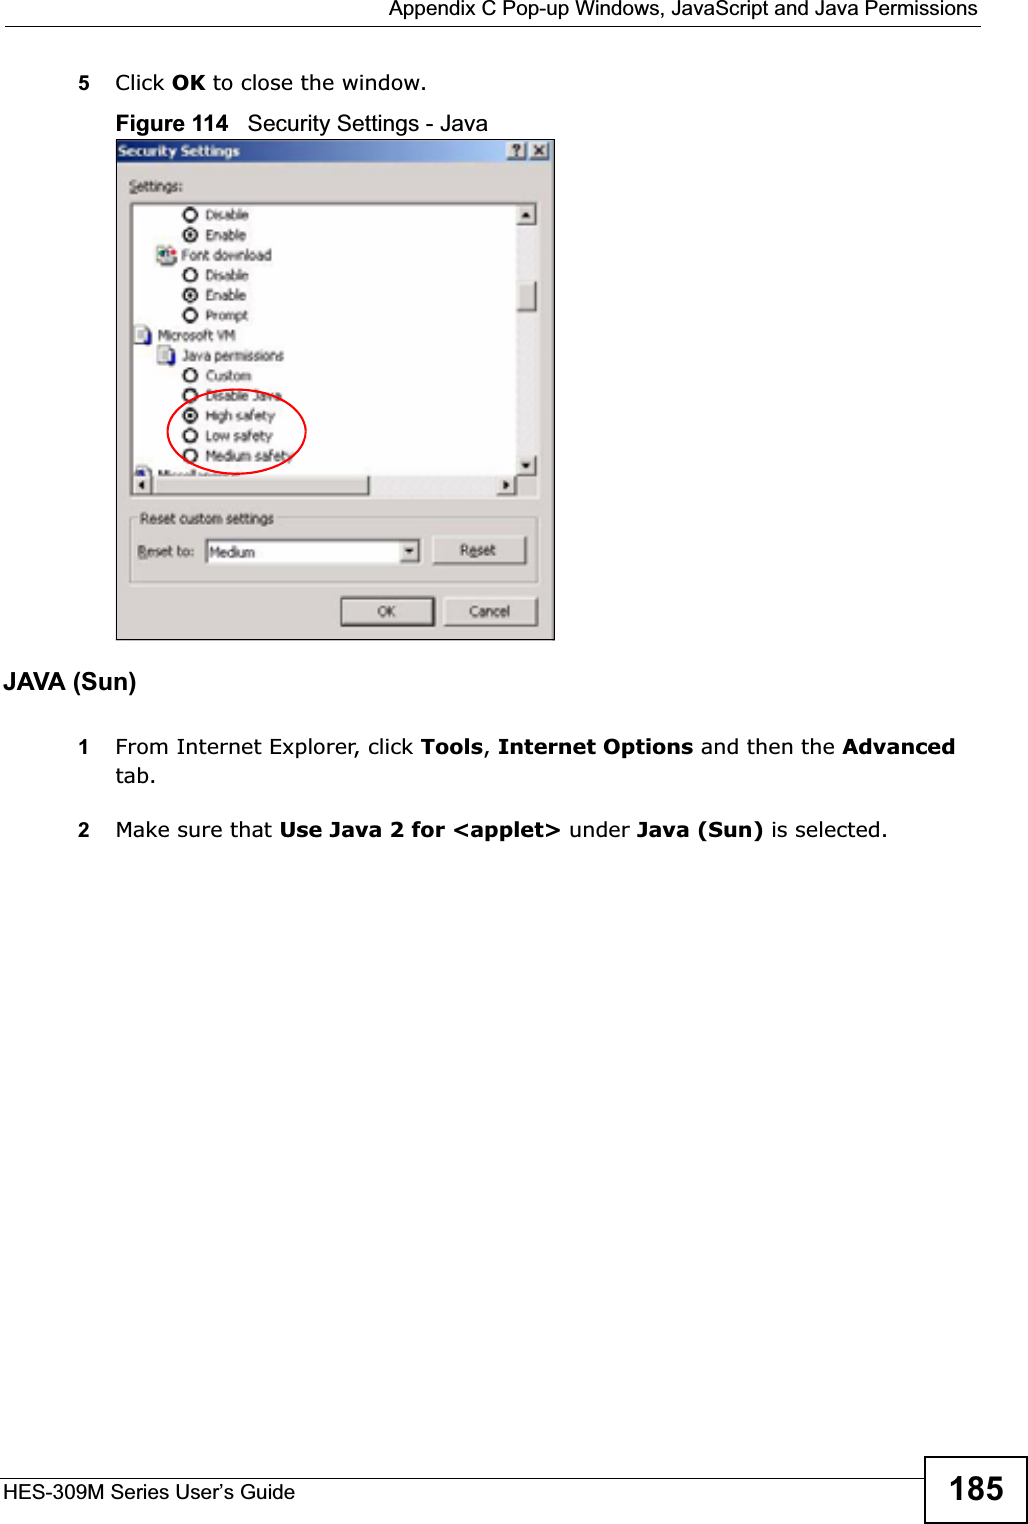  Appendix C Pop-up Windows, JavaScript and Java PermissionsHES-309M Series User’s Guide 1855Click OK to close the window.Figure 114   Security Settings - Java JAVA (Sun)1From Internet Explorer, click Tools,Internet Options and then the Advancedtab. 2Make sure that Use Java 2 for &lt;applet&gt; under Java (Sun) is selected.